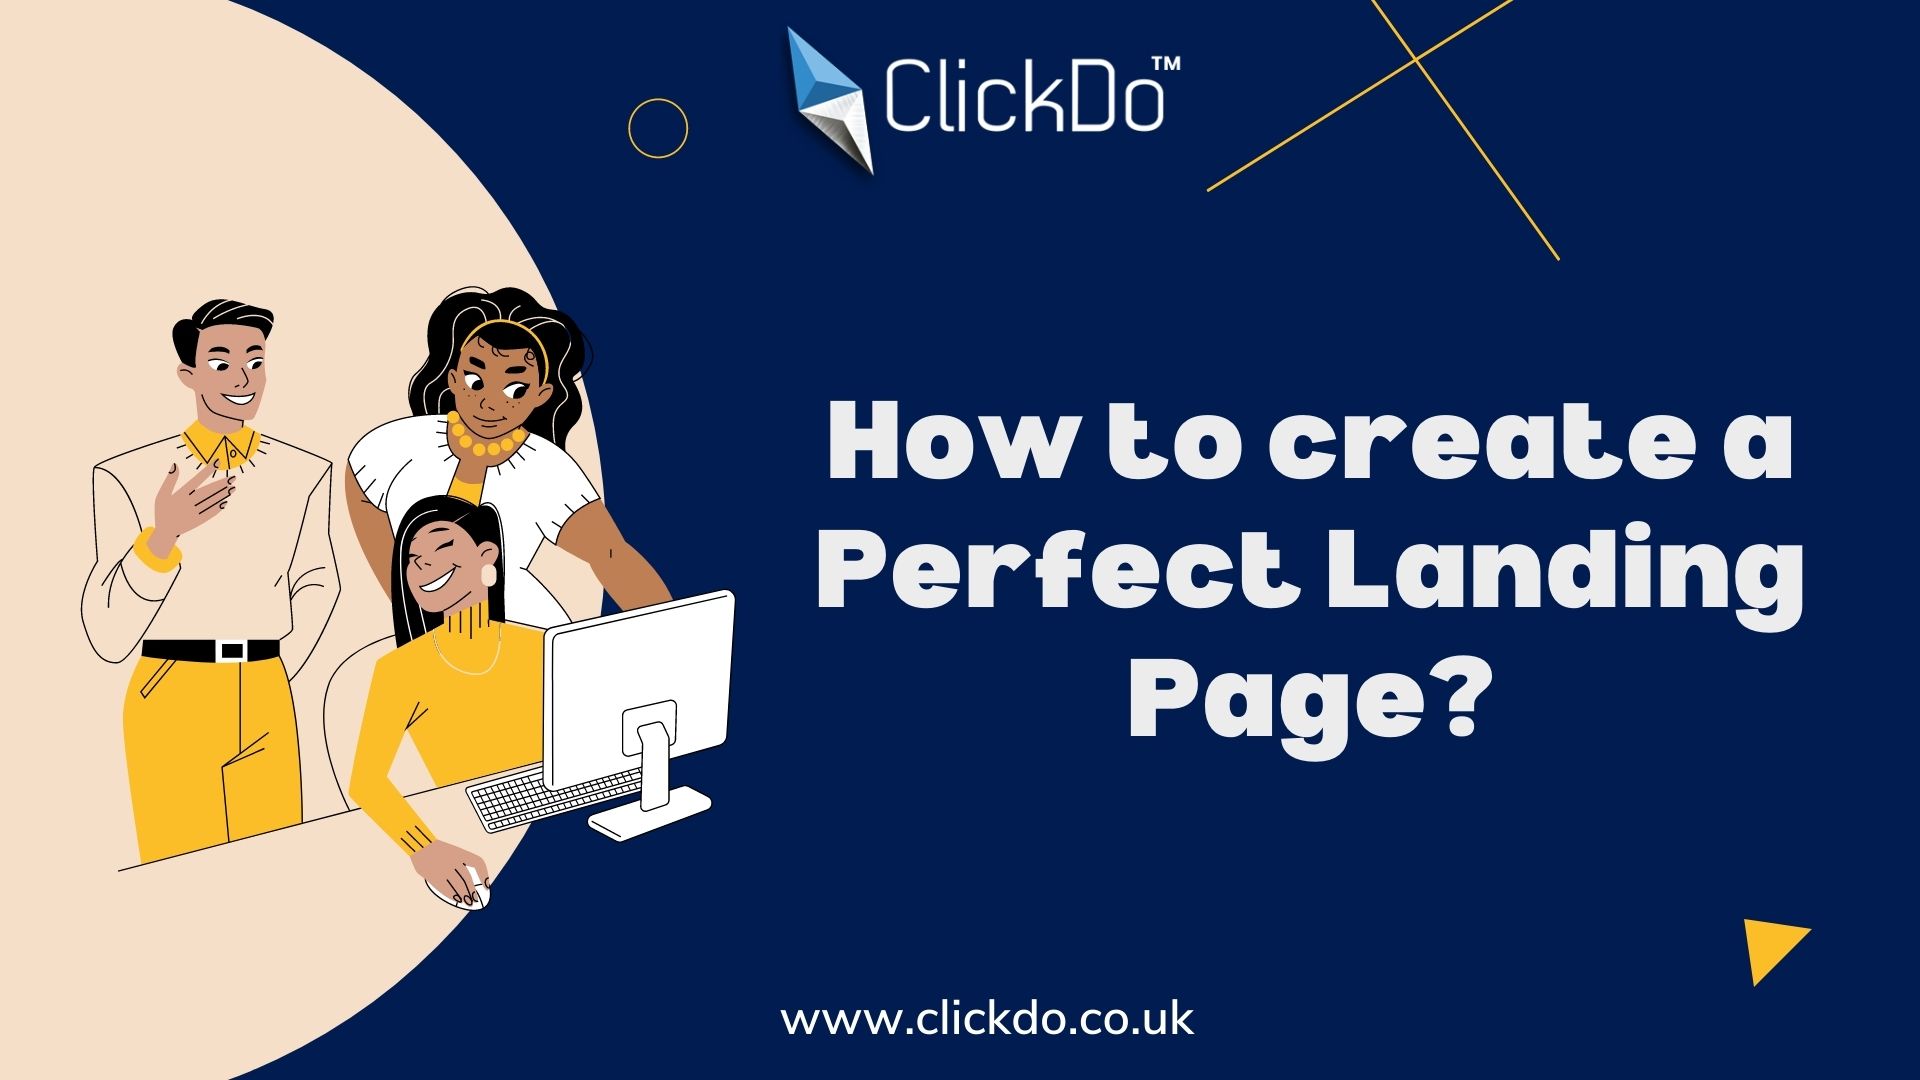 How to create a Perfect Landing Page